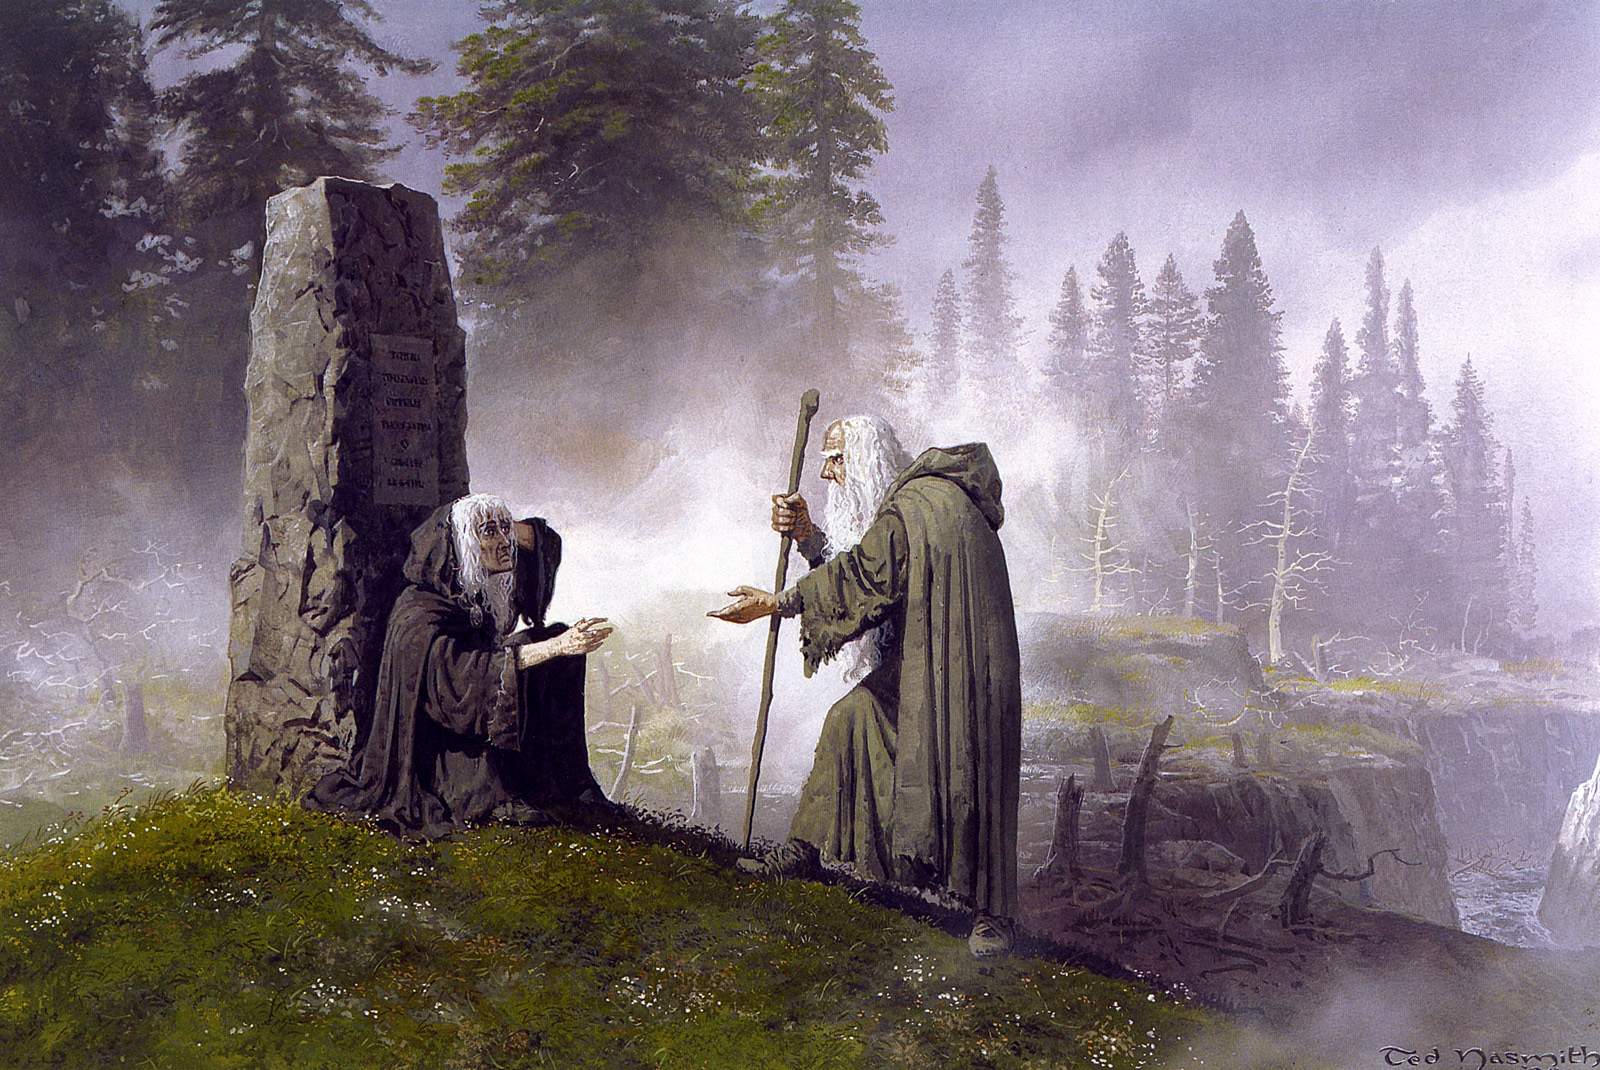 http://www.dana-mad.ru/gal/images/Ted%20Nasmith/The%20Silmarillion/ted%20nasmith_the%20silmarillion_2_quenta%20silmarillion_22_of%20the%20ruin%20of%20doriath_morwen%20and%20hurin.jpg